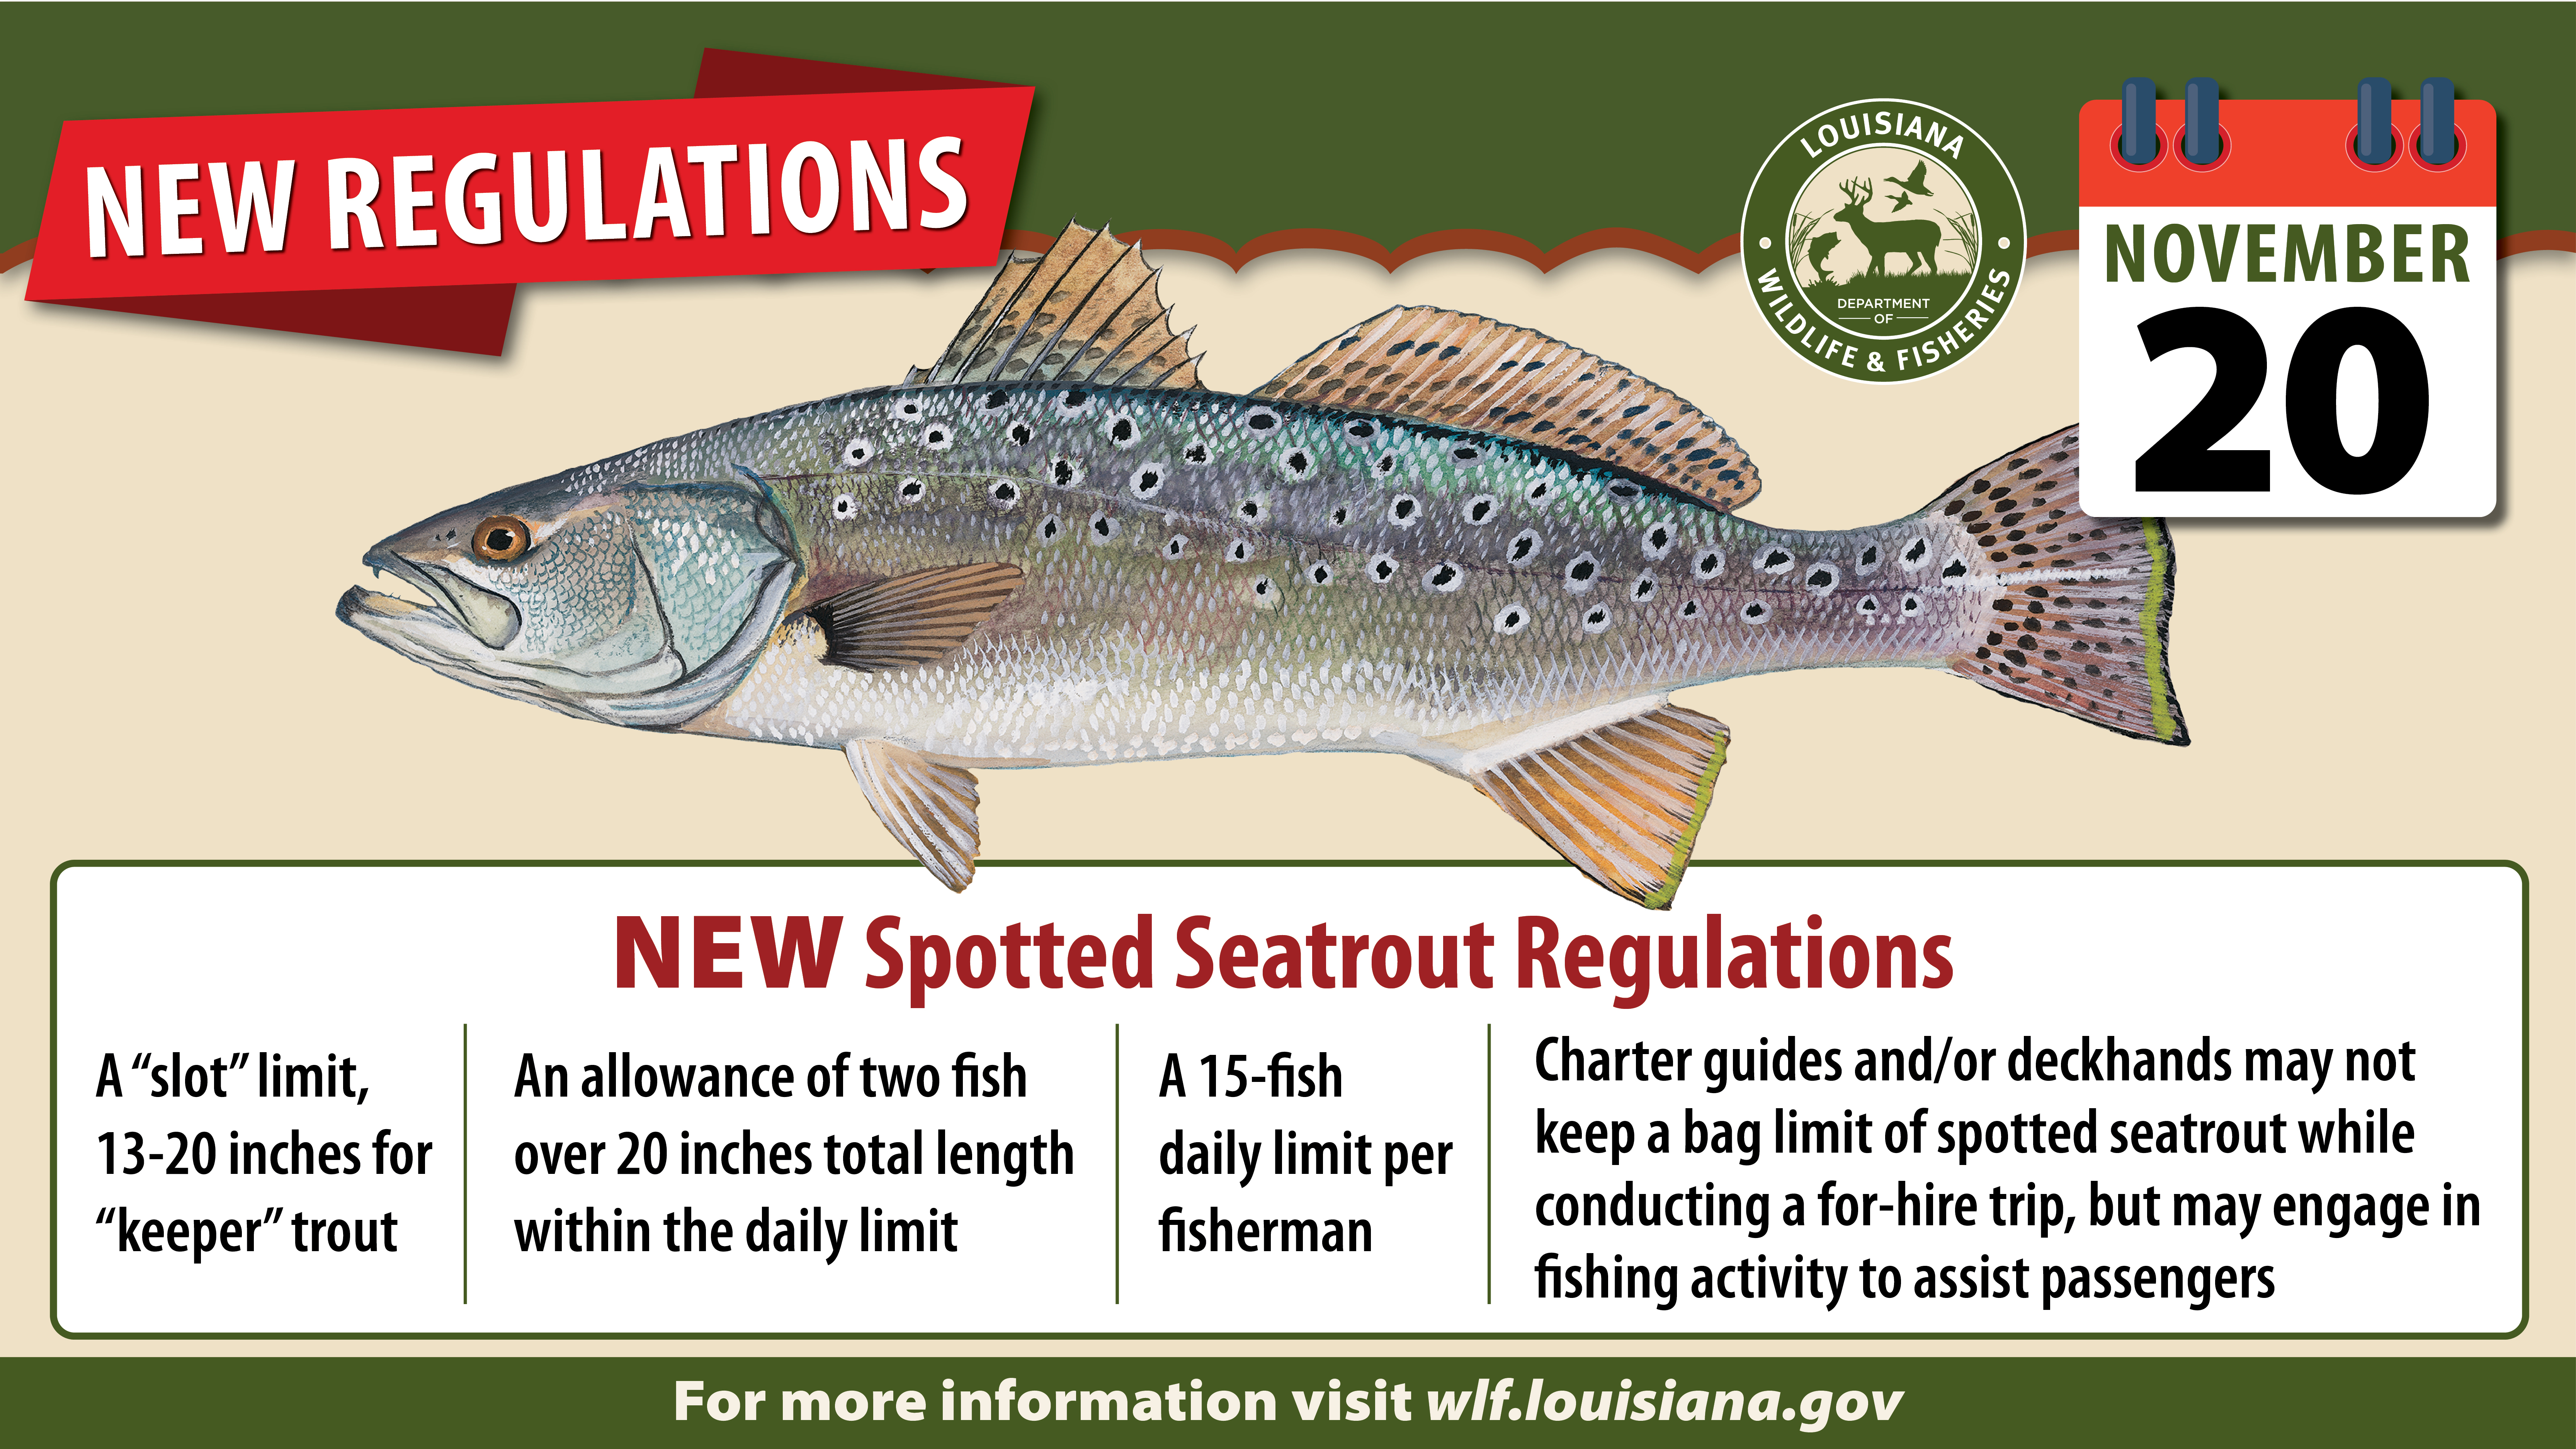 New Speckled Trout Regulations go into Effect November 20